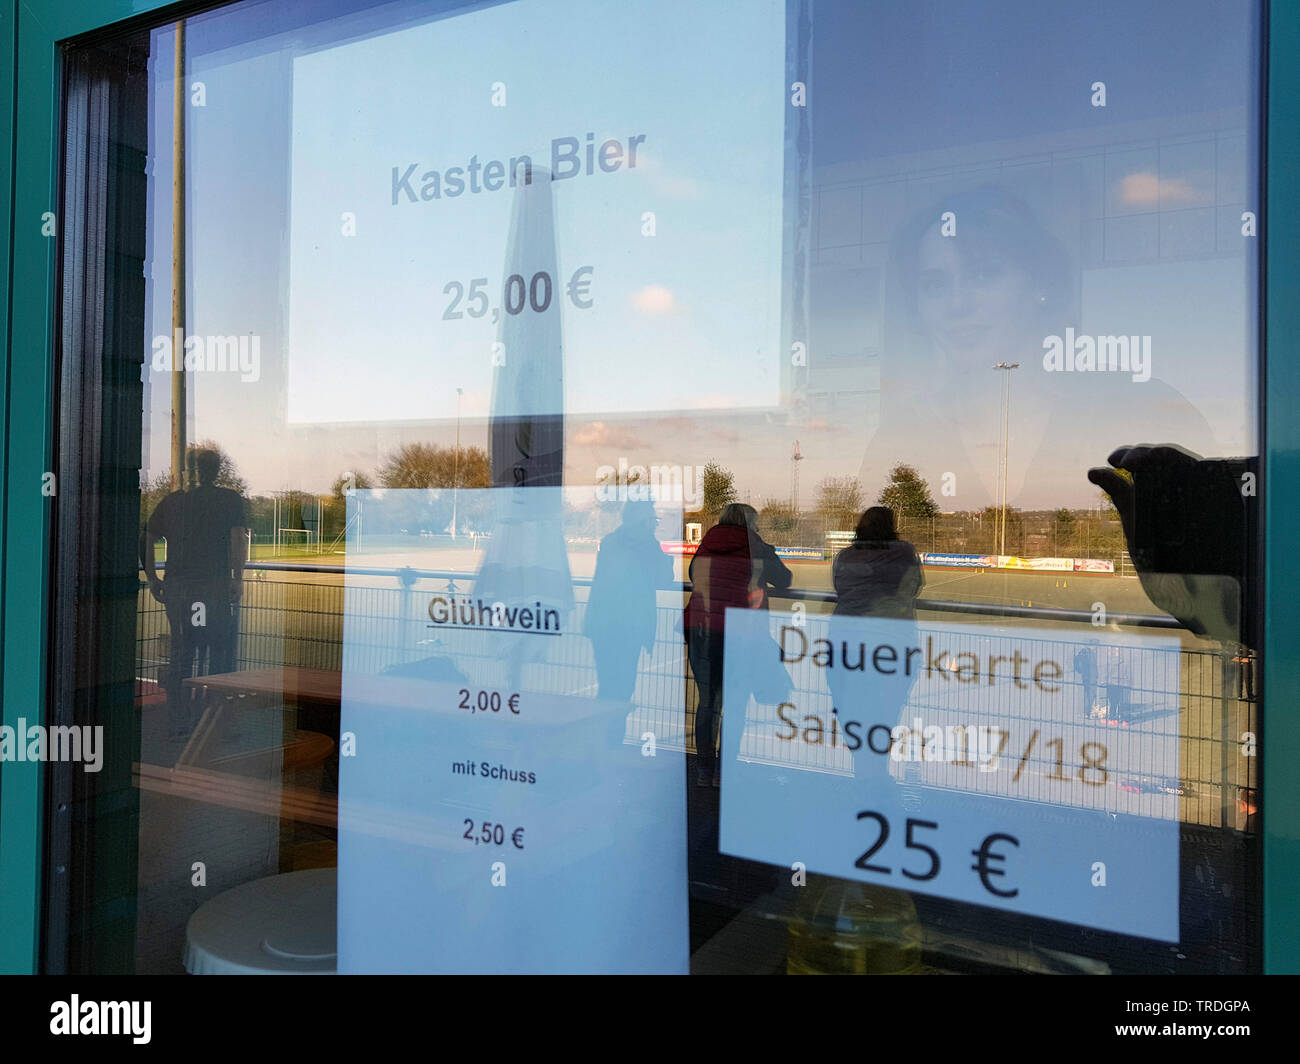 sale of drinks at a sports field, Germany Stock Photo